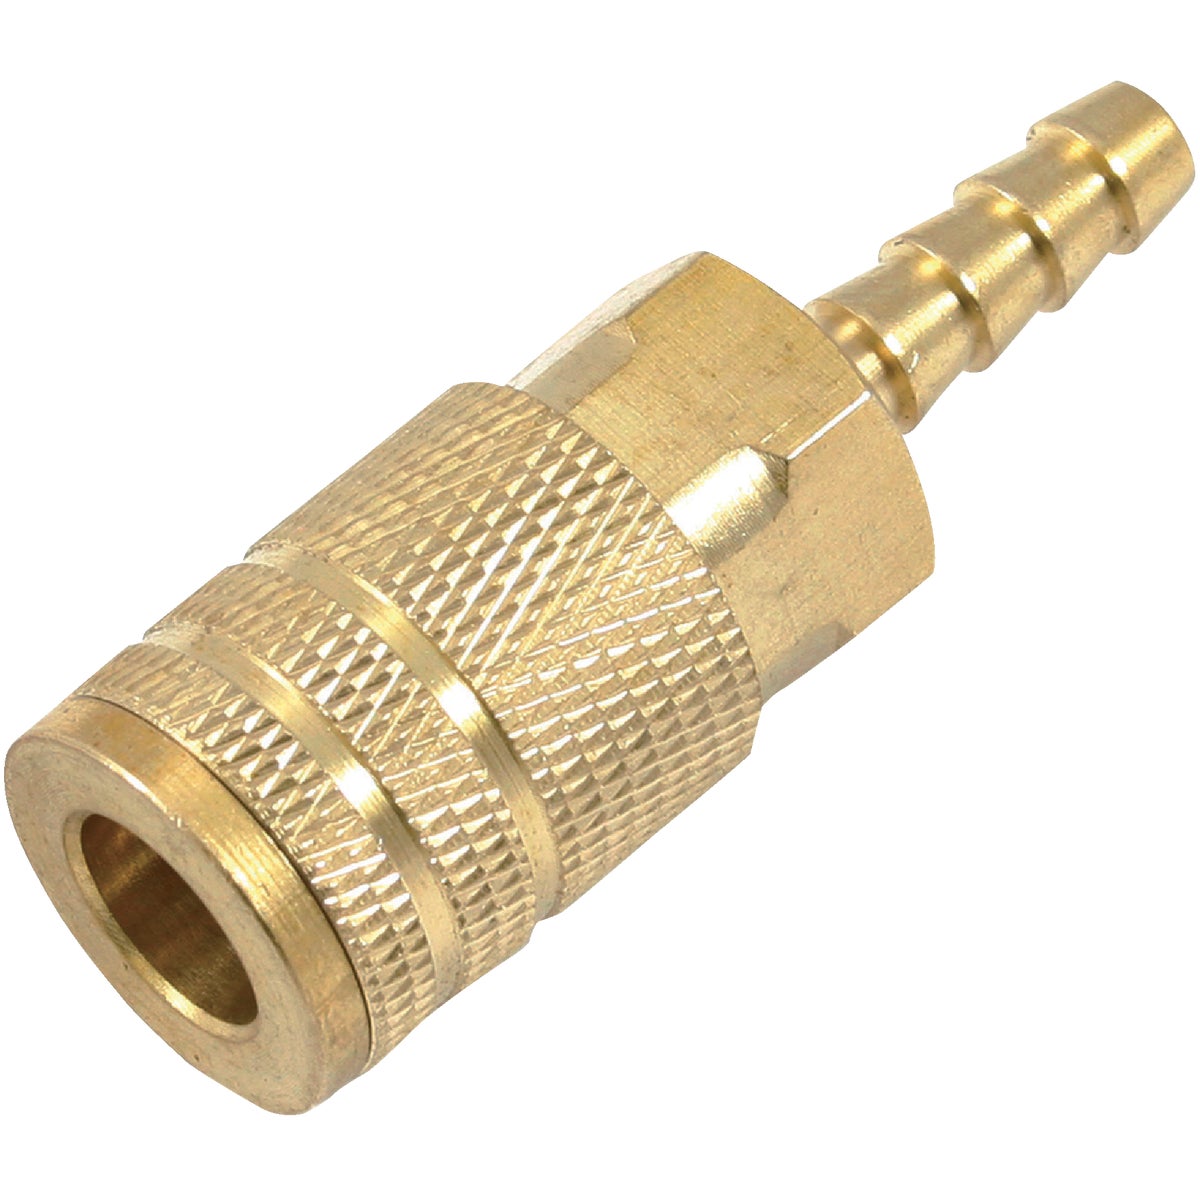 Item 570163, Air line coupler for use on compressed air lines only